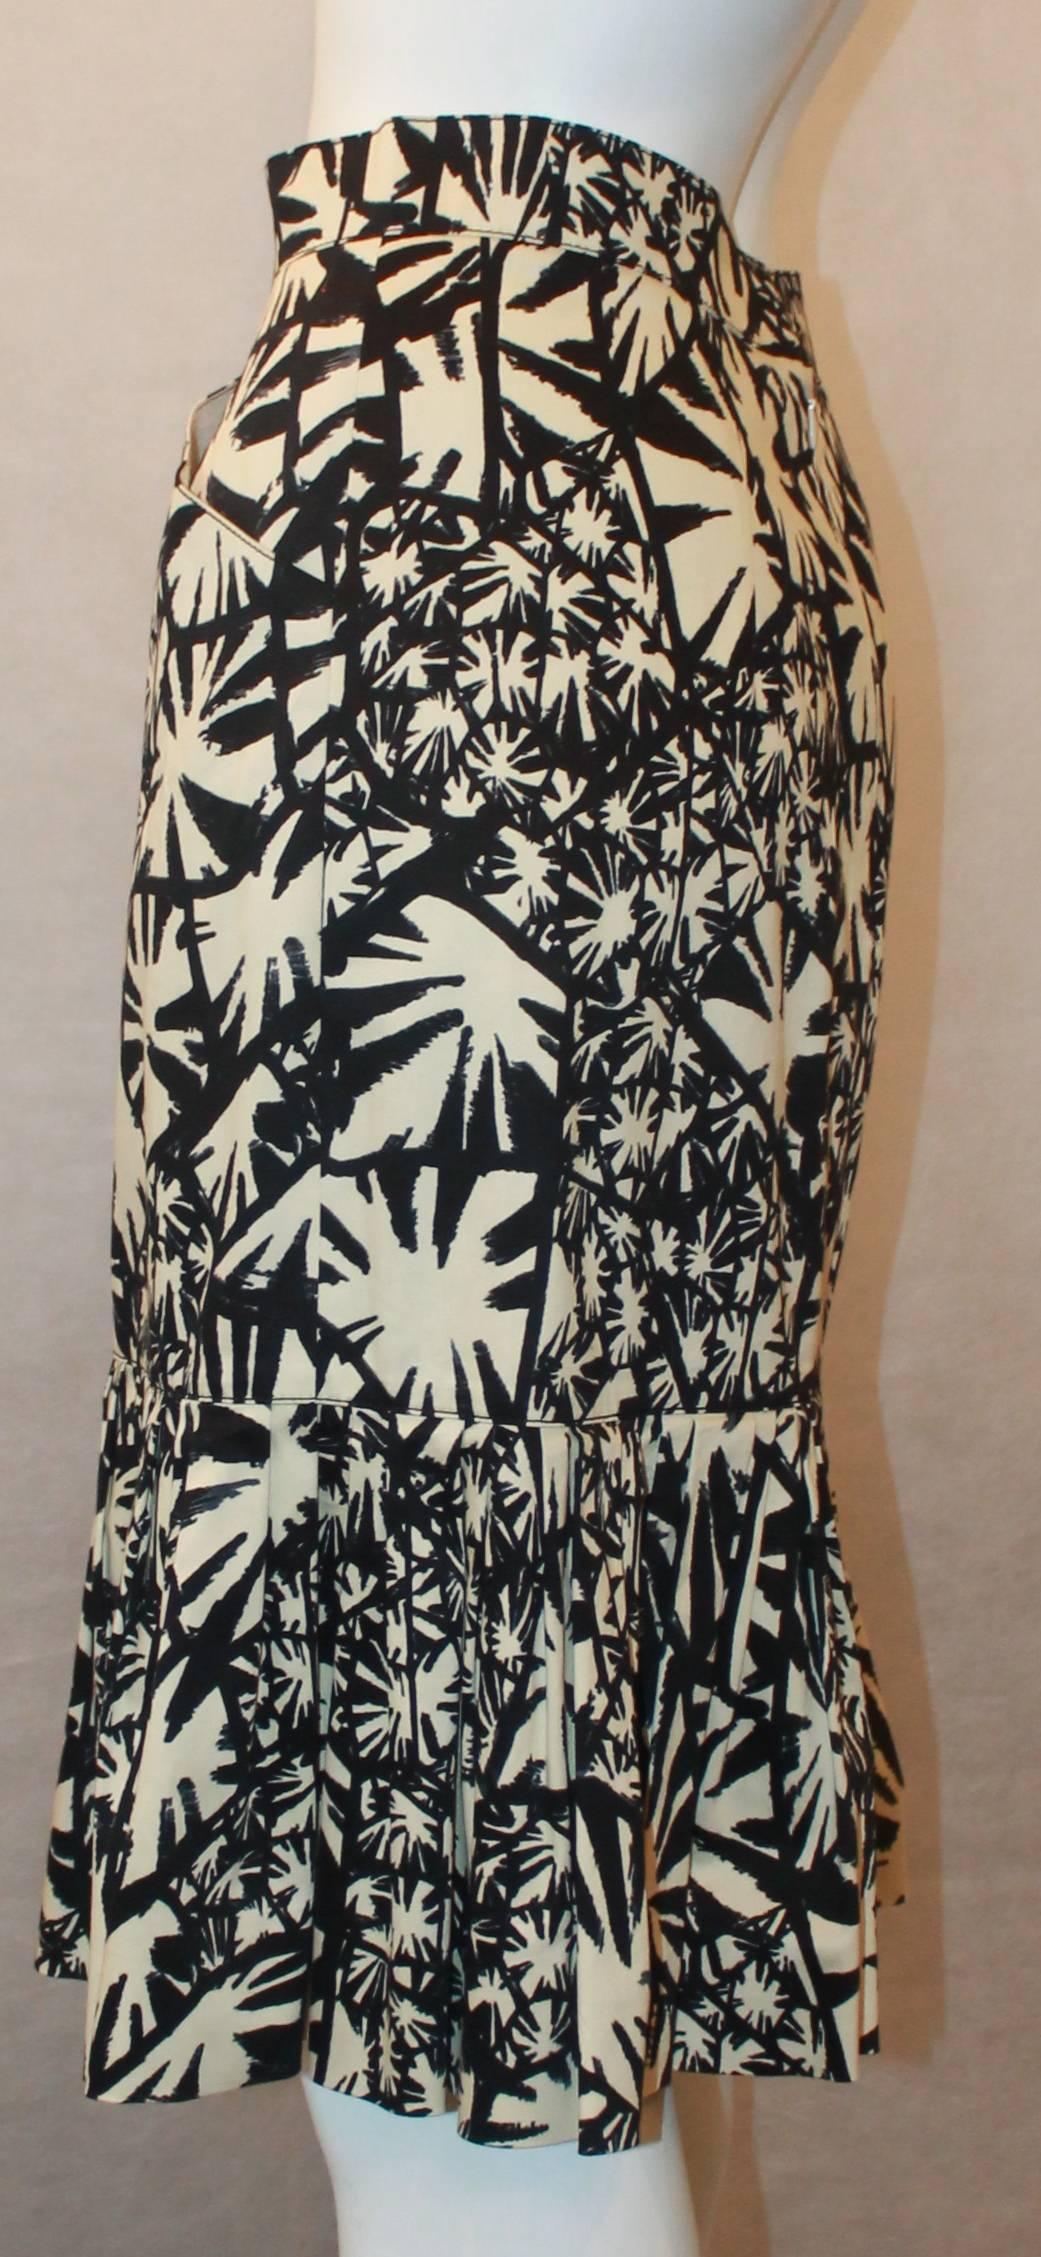 Oscar de la Renta Black & Ivory Abstract Printed Cotton Skirt - 8. This skirt is in excellent condition and has 2 side pockets. It has a panel all the way down on the front and has pleating on the bottom all the way around. It also has a back